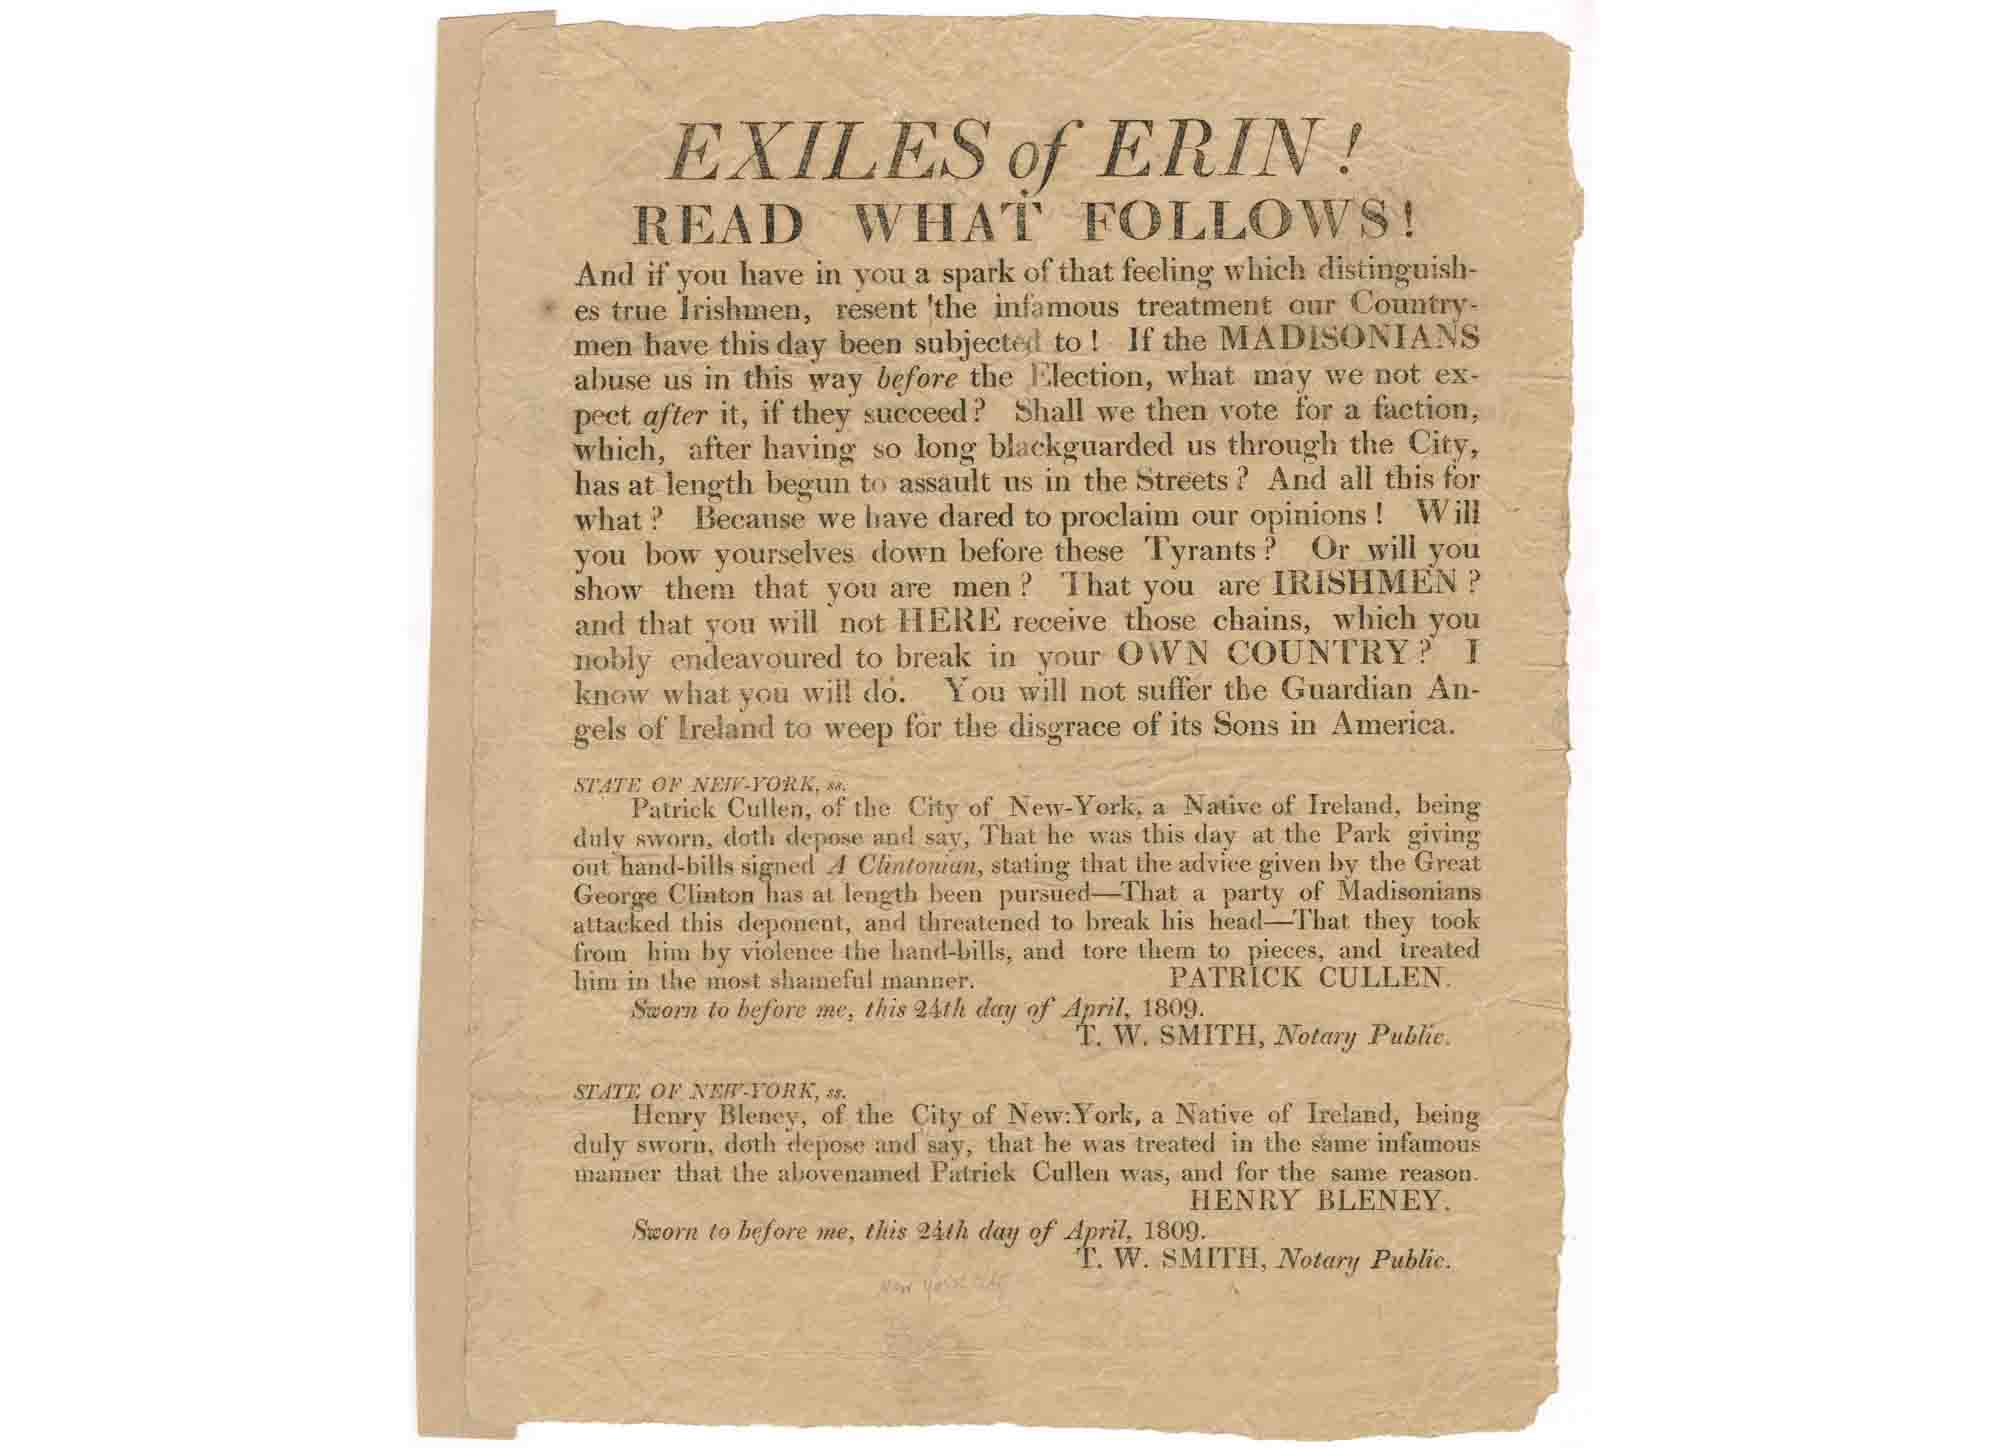 "Exiles of Erin" broadside on display at Gracie Mansion.